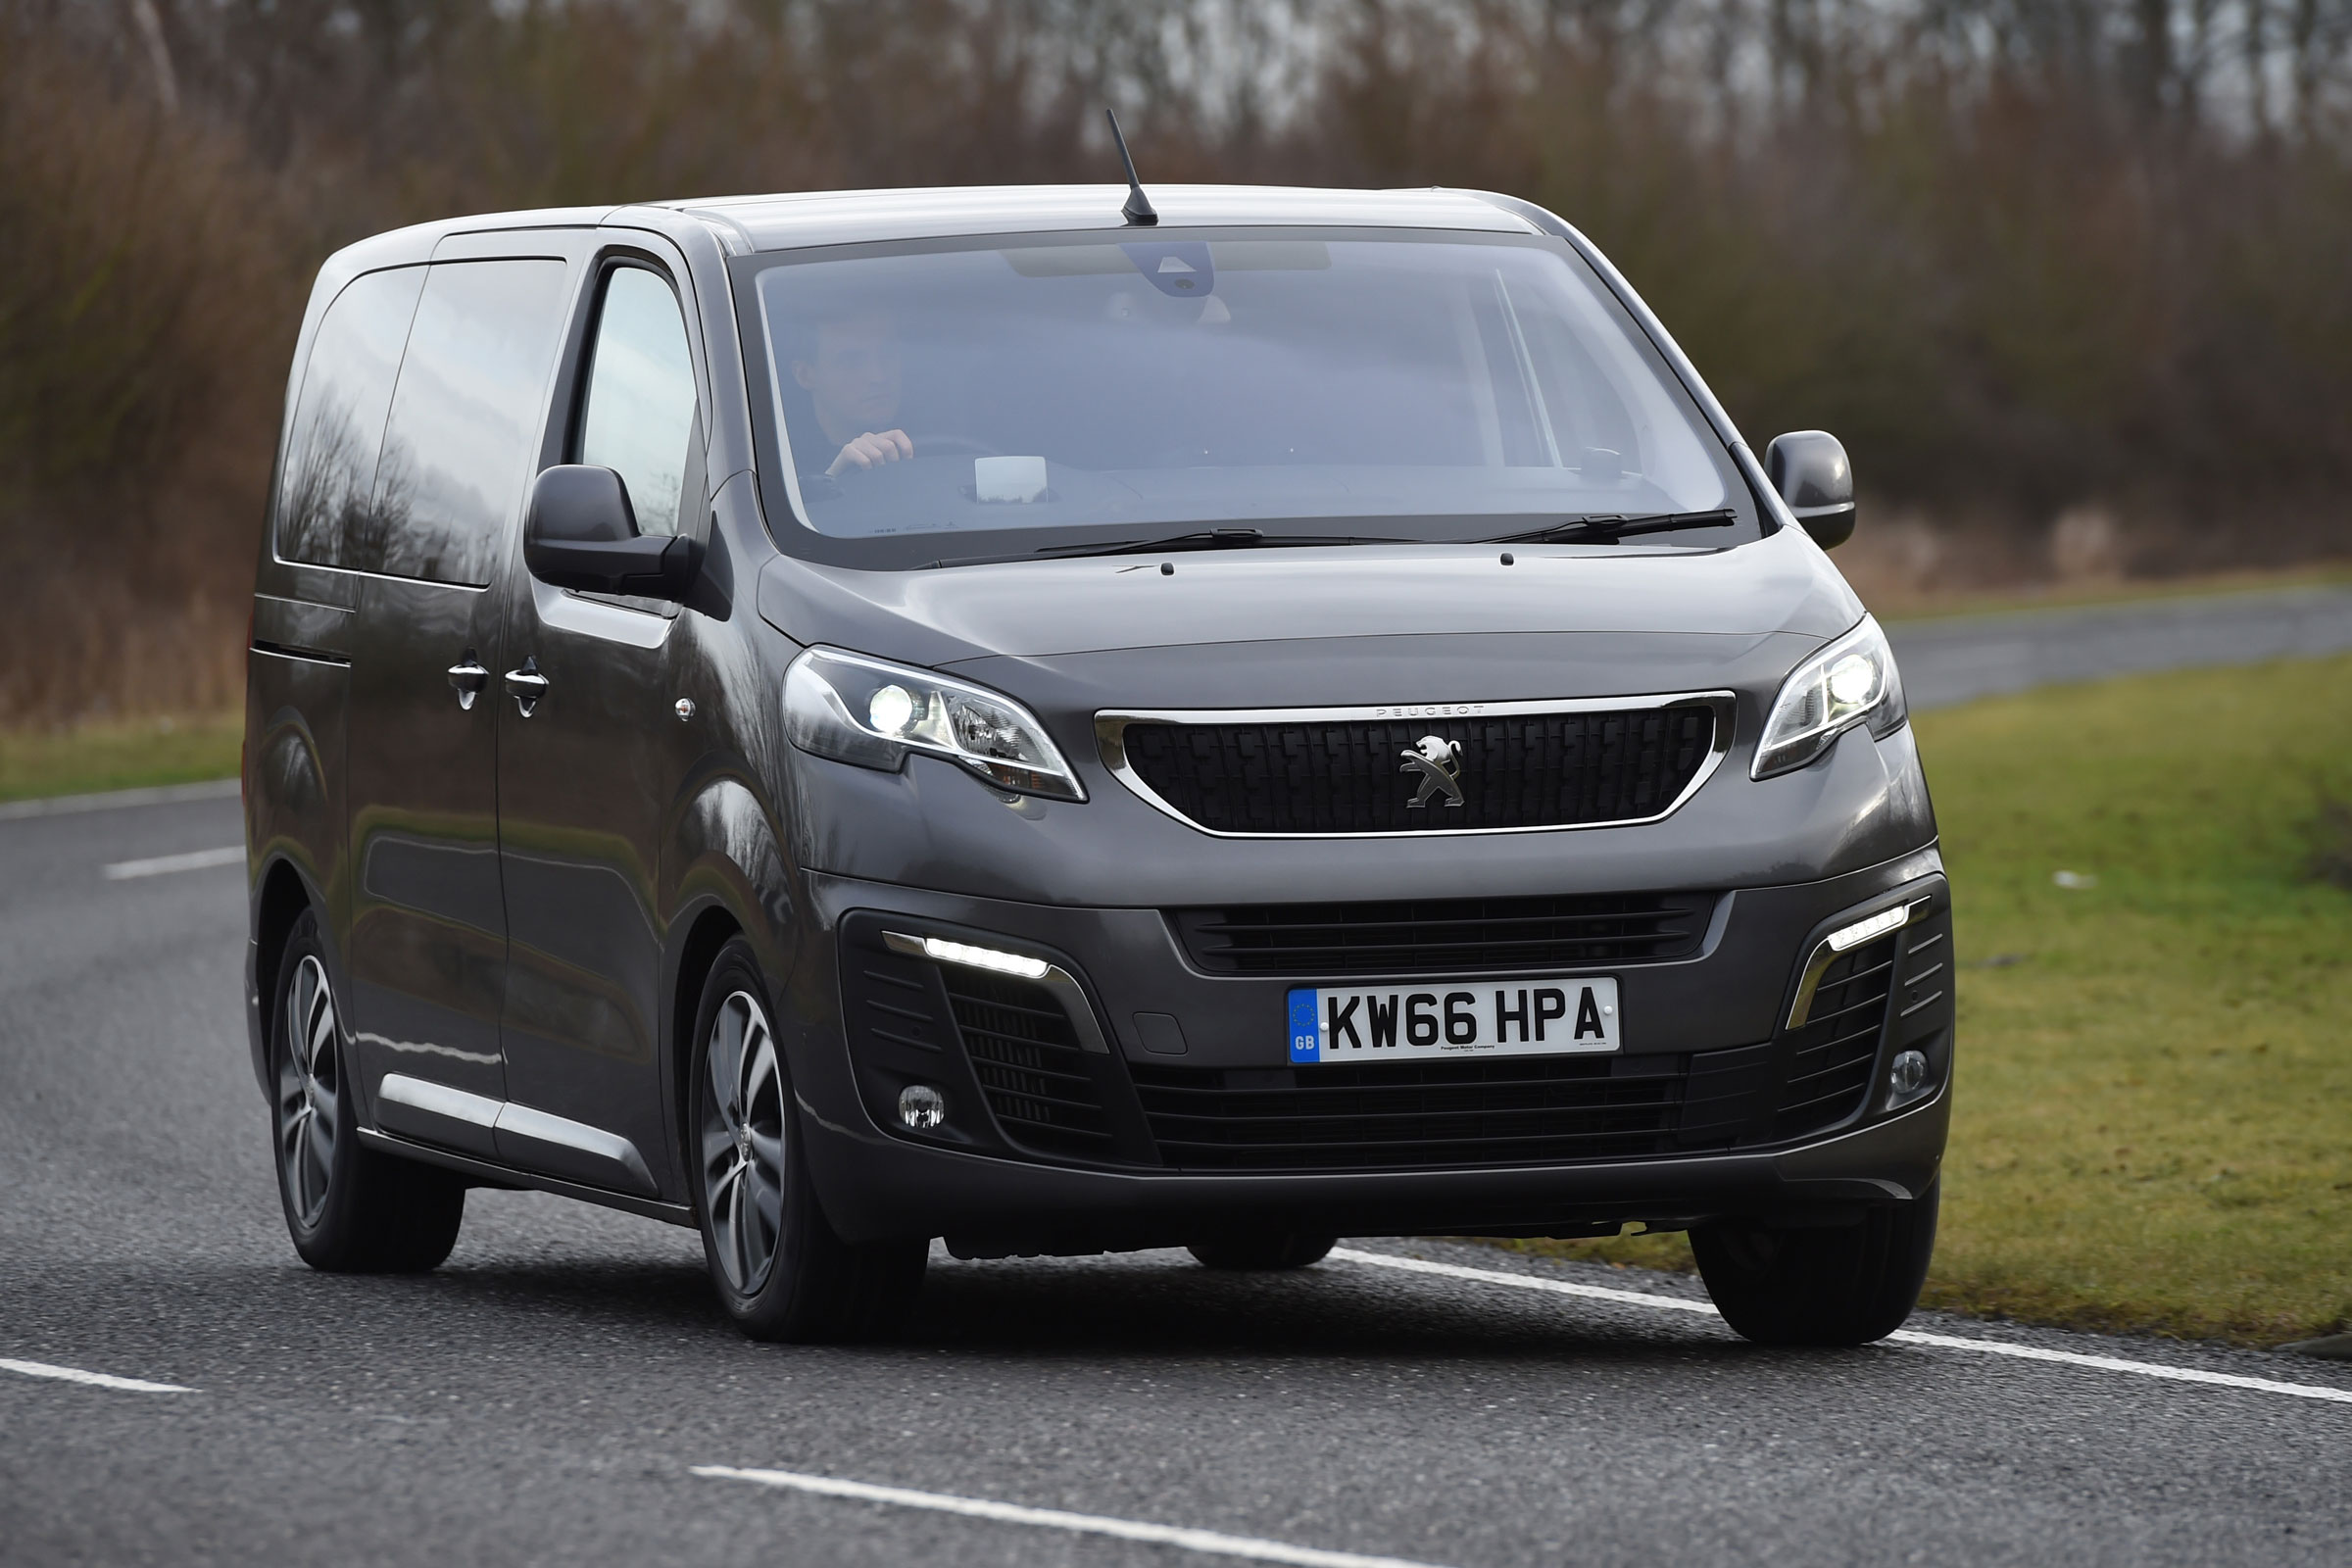 Peugeot 3008 MPV Owner Reviews: MPG, Problems 